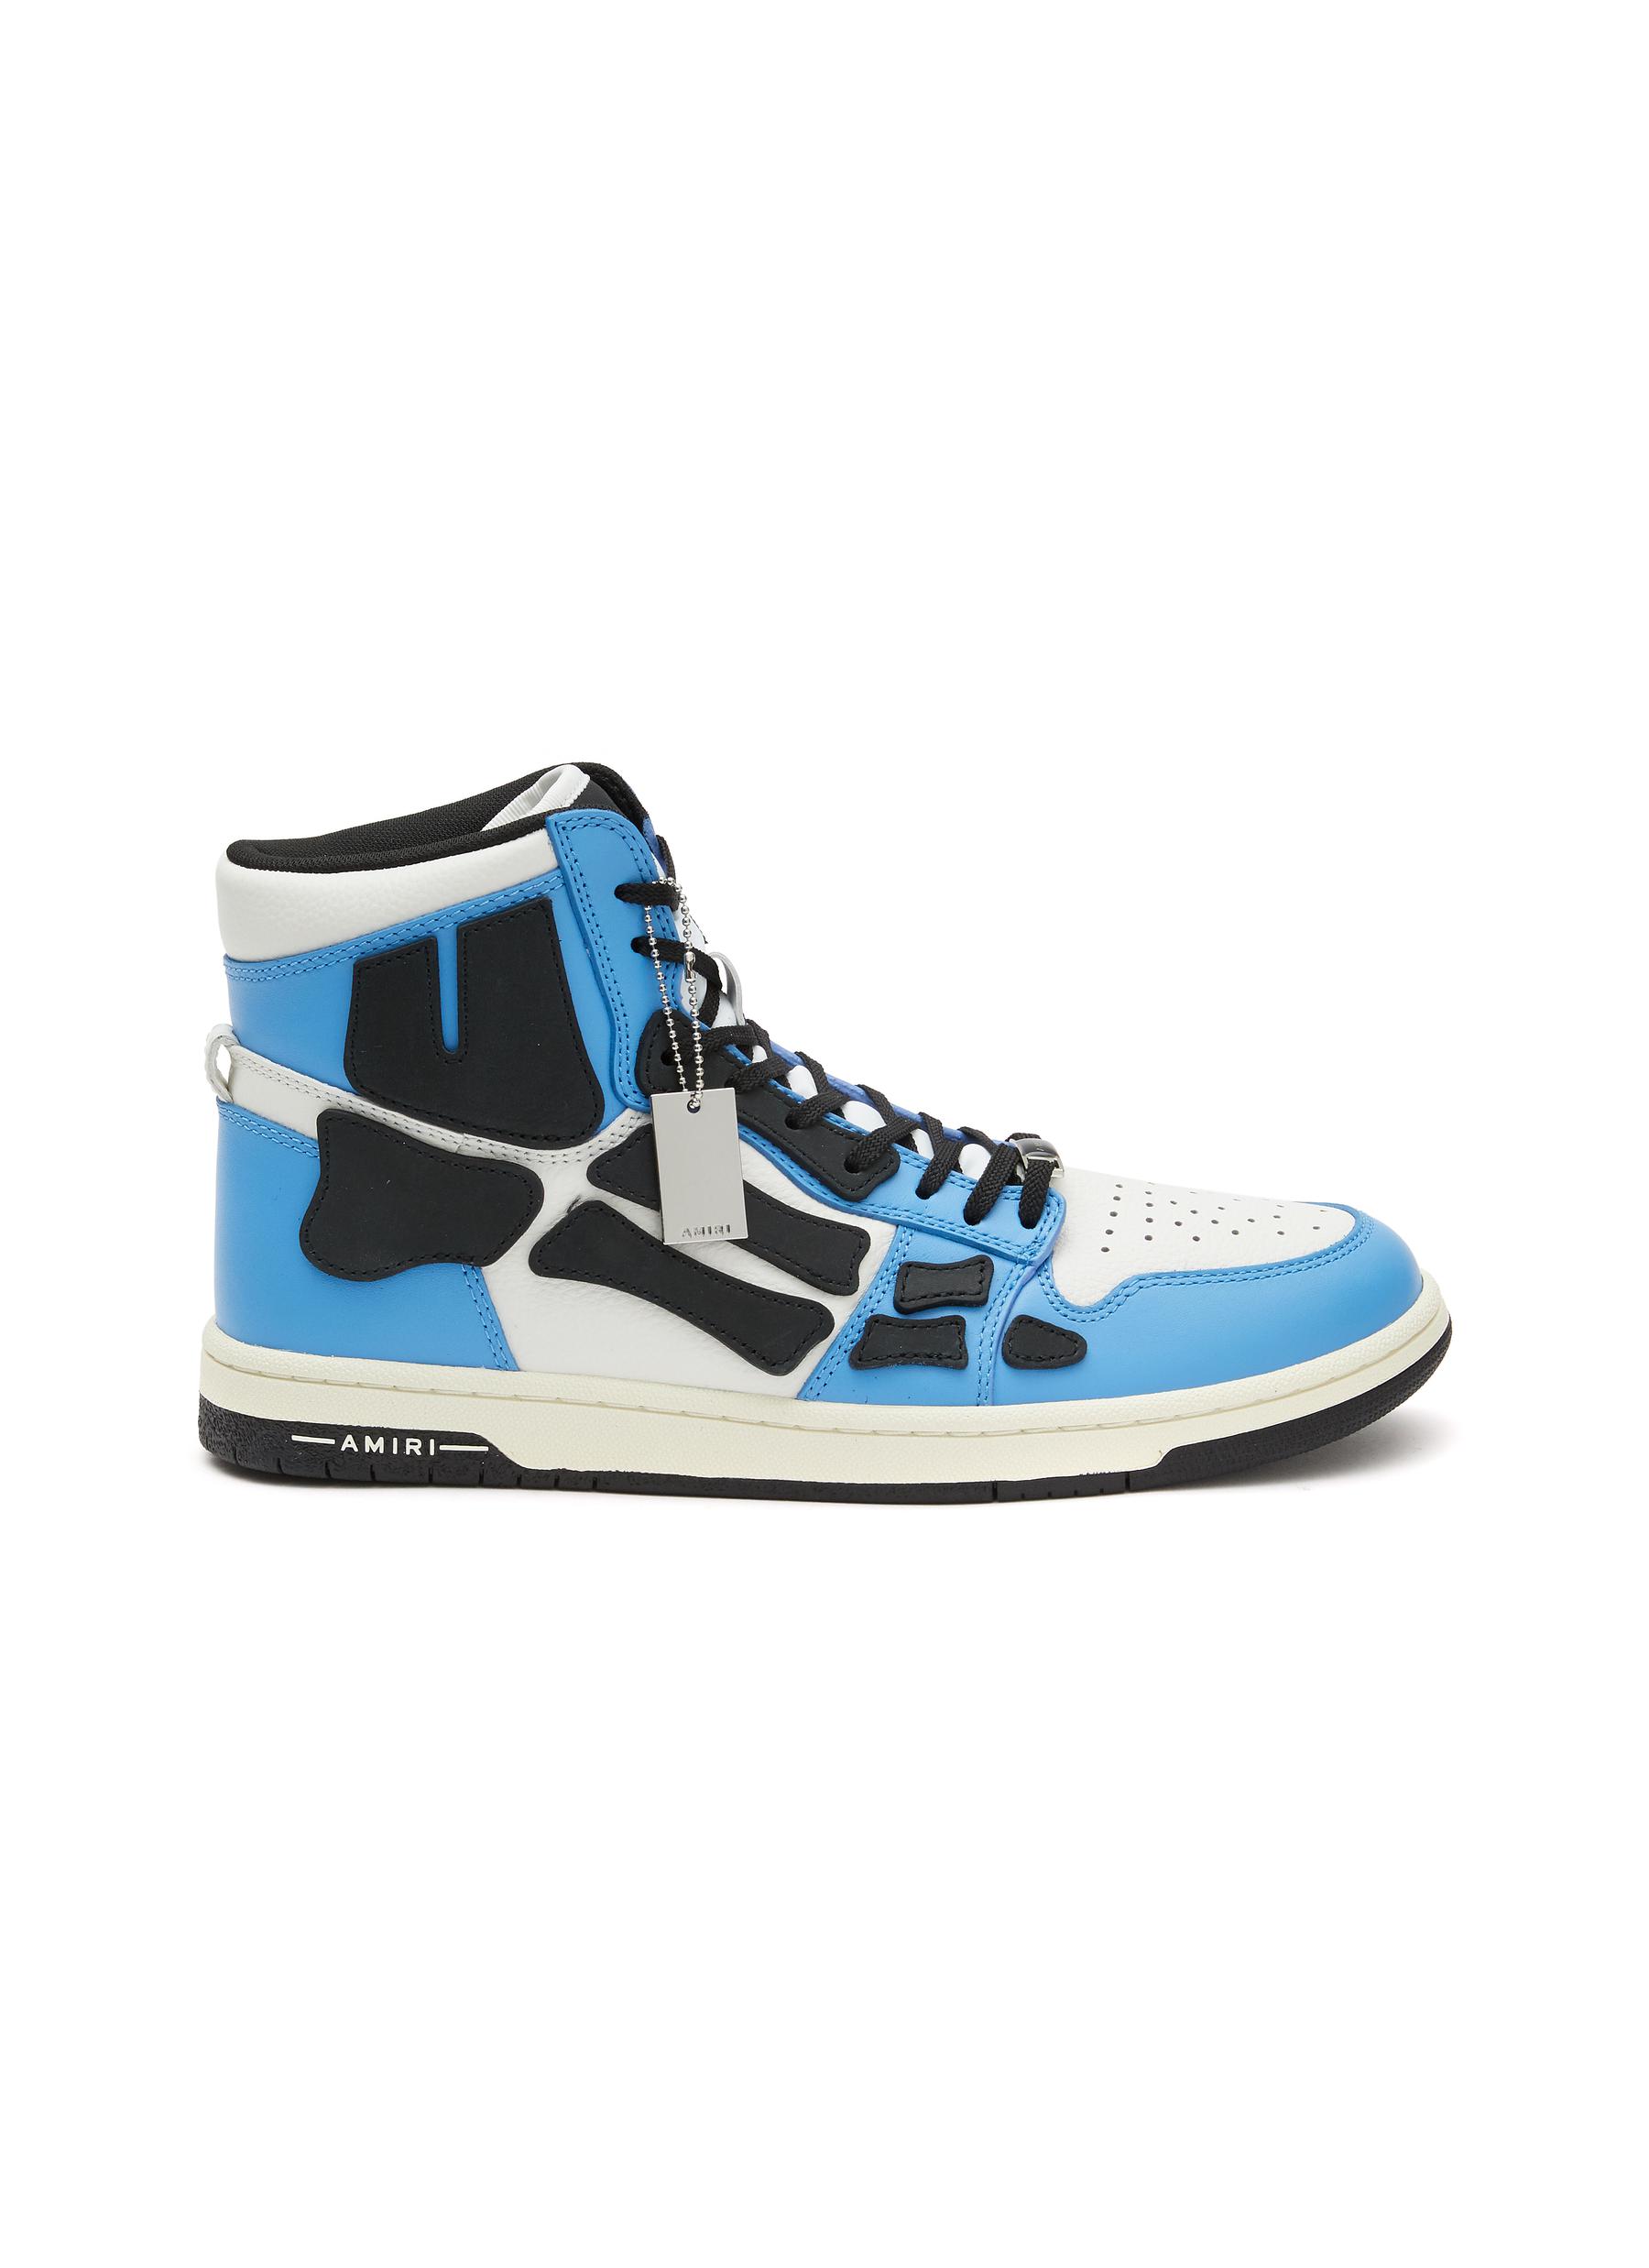 AMIRI ‘SKEL' HIGH TOP LACE UP LEATHER SNEAKERS